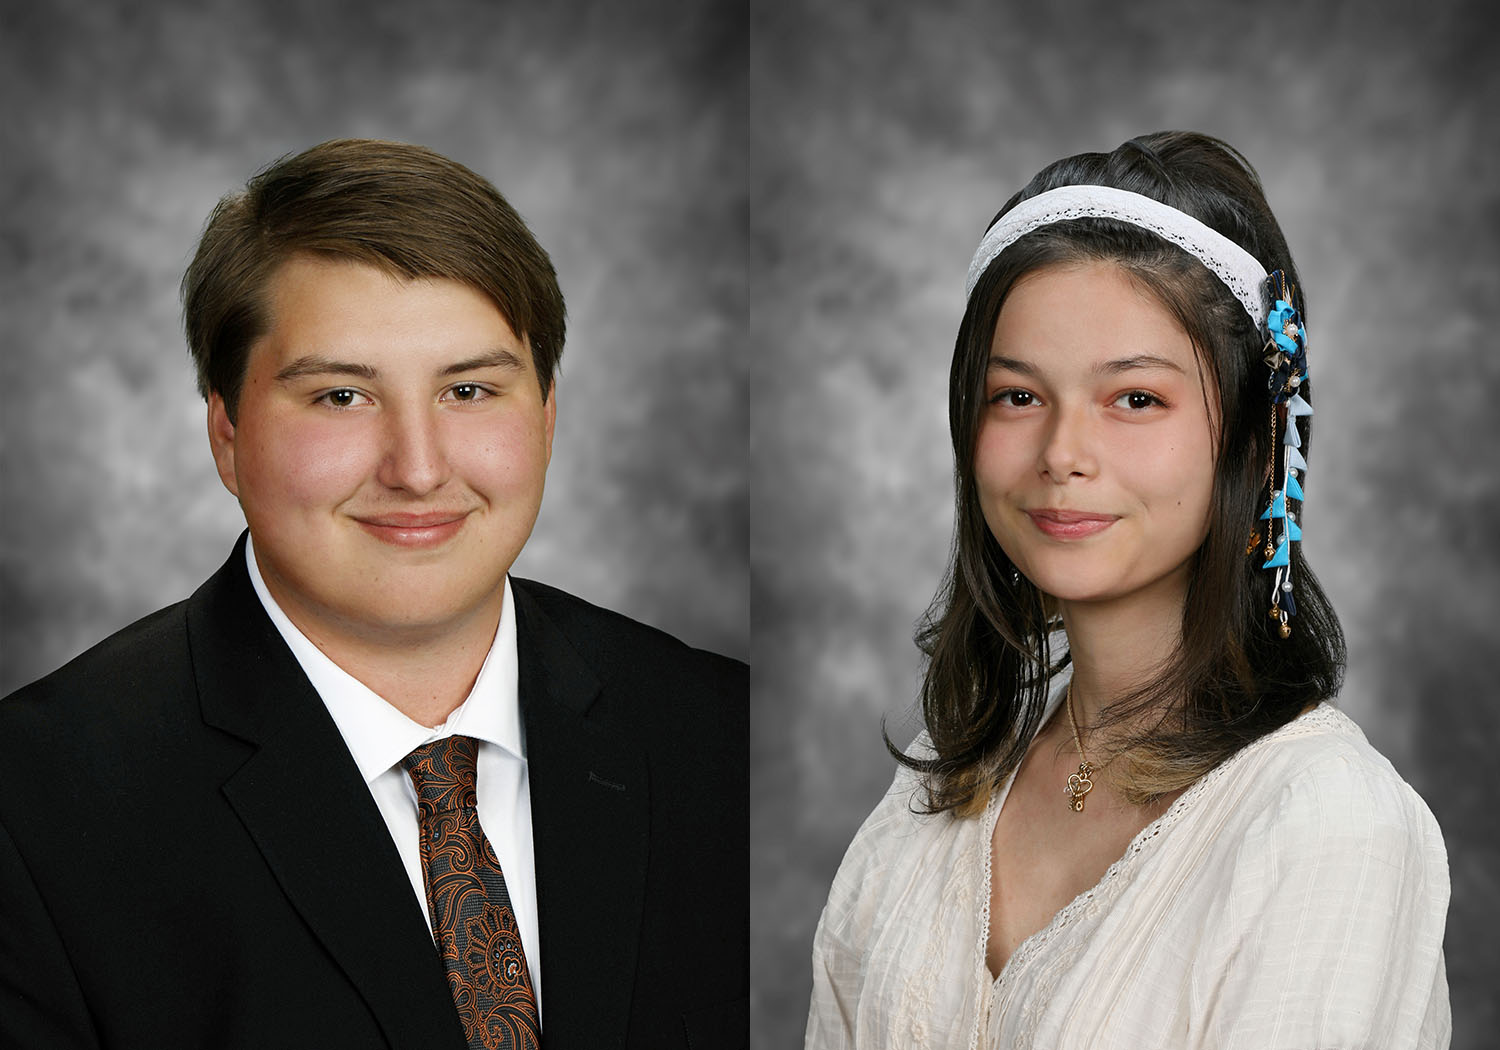 Schedule a Formal Yearbook Sitting AT THE STUDIO | F2.jpg